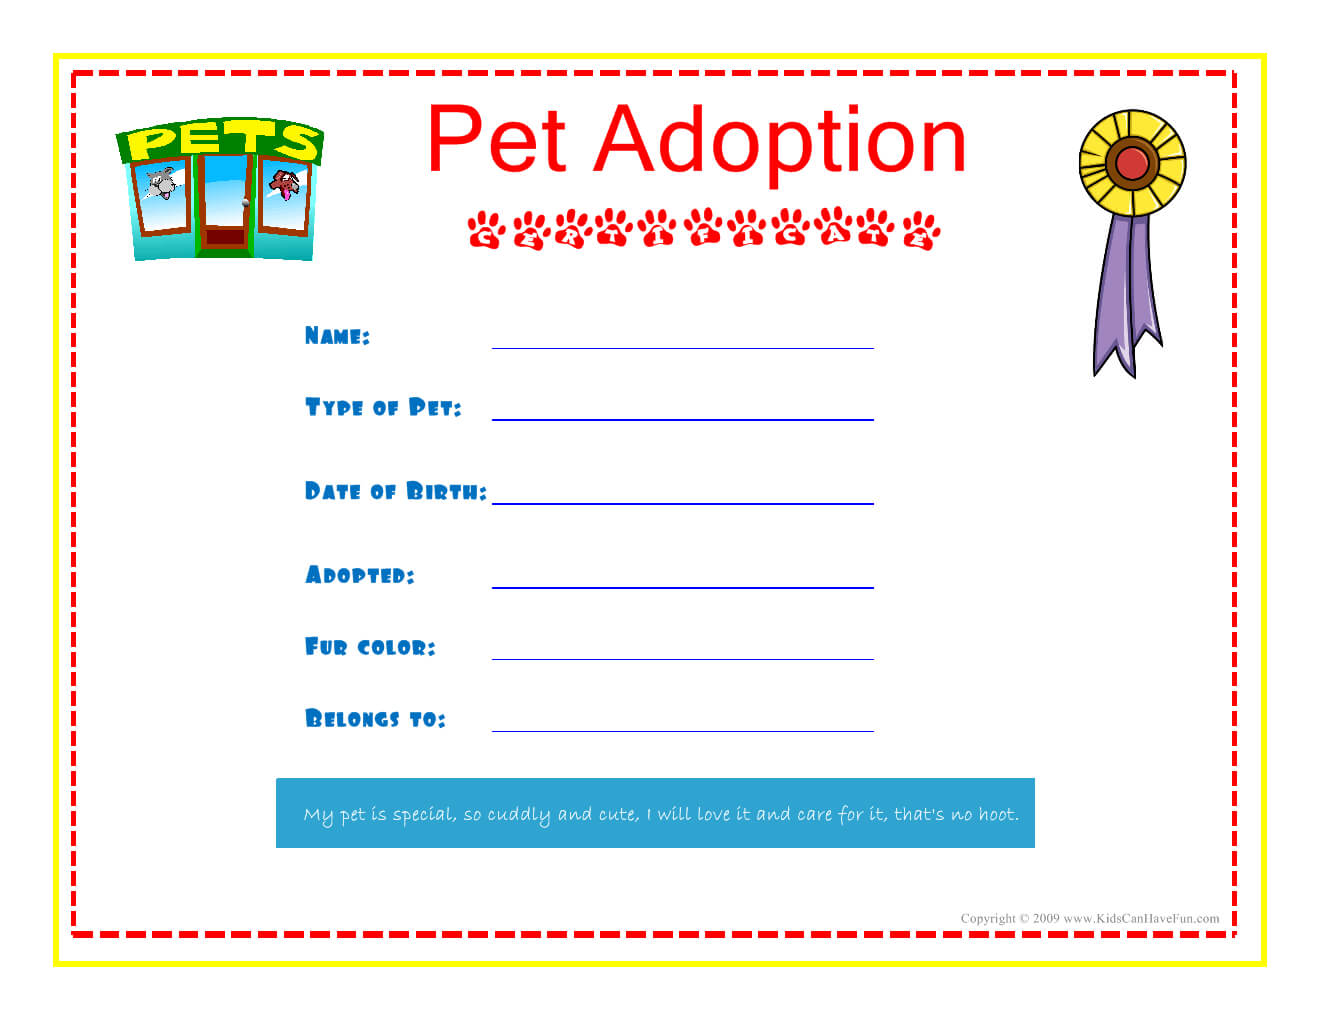 Pet Adoption Certificate For The Kids To Fill Out About With Pet Adoption Certificate Template